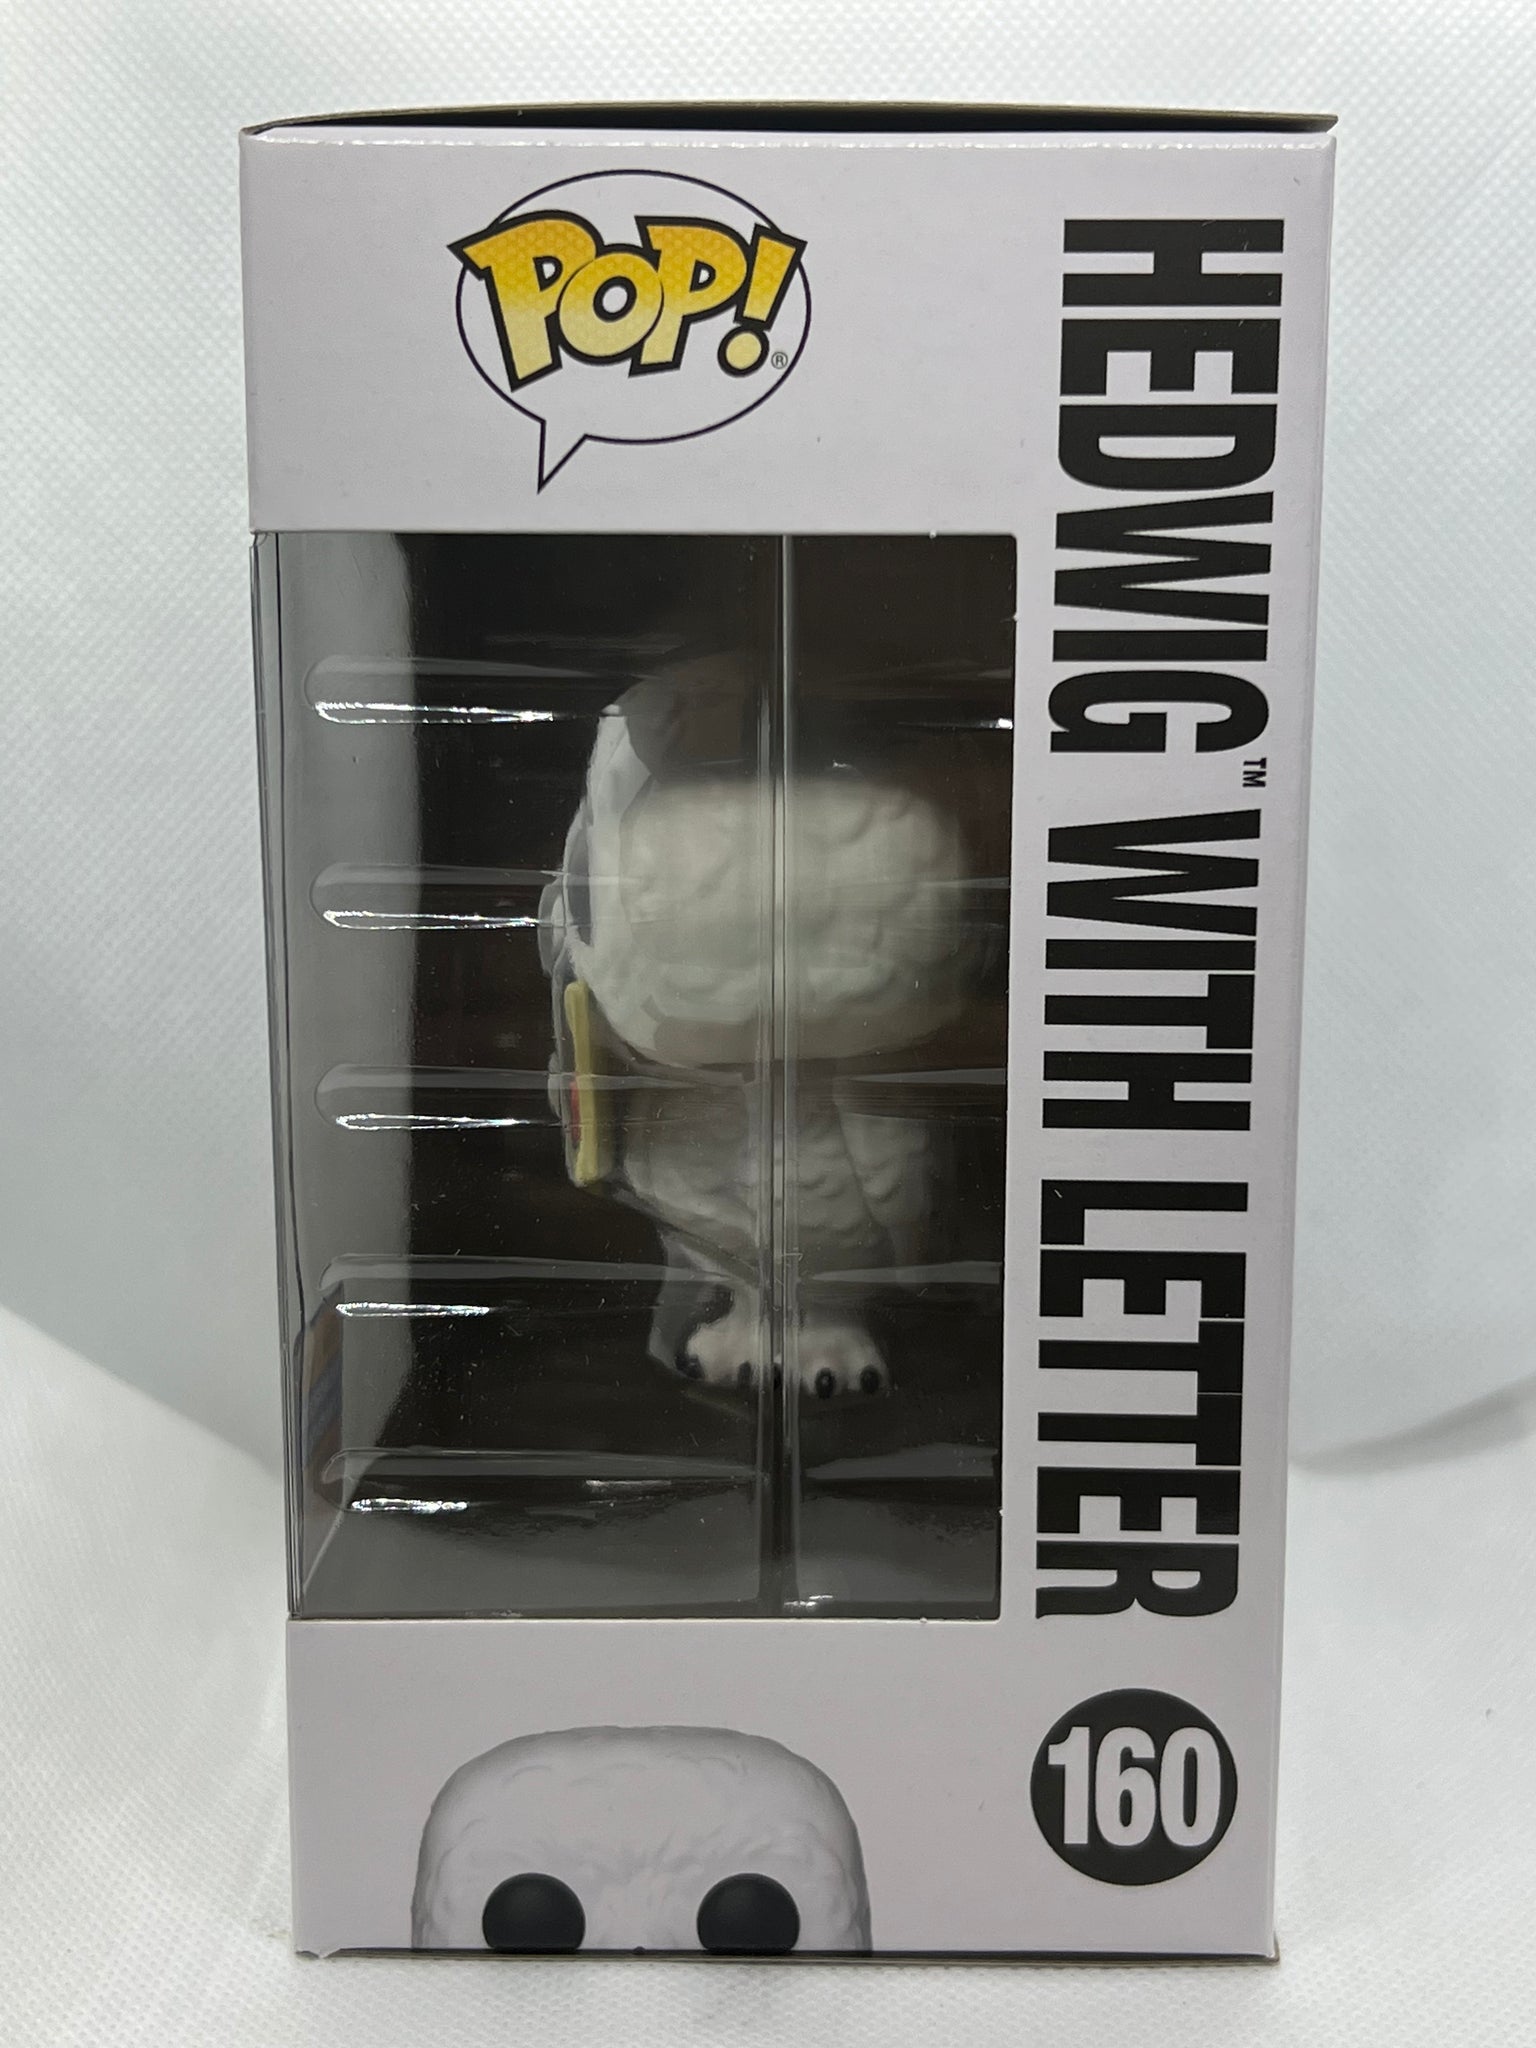 Harry Potter Exclusive Funko POP, Hedwig w/Letter